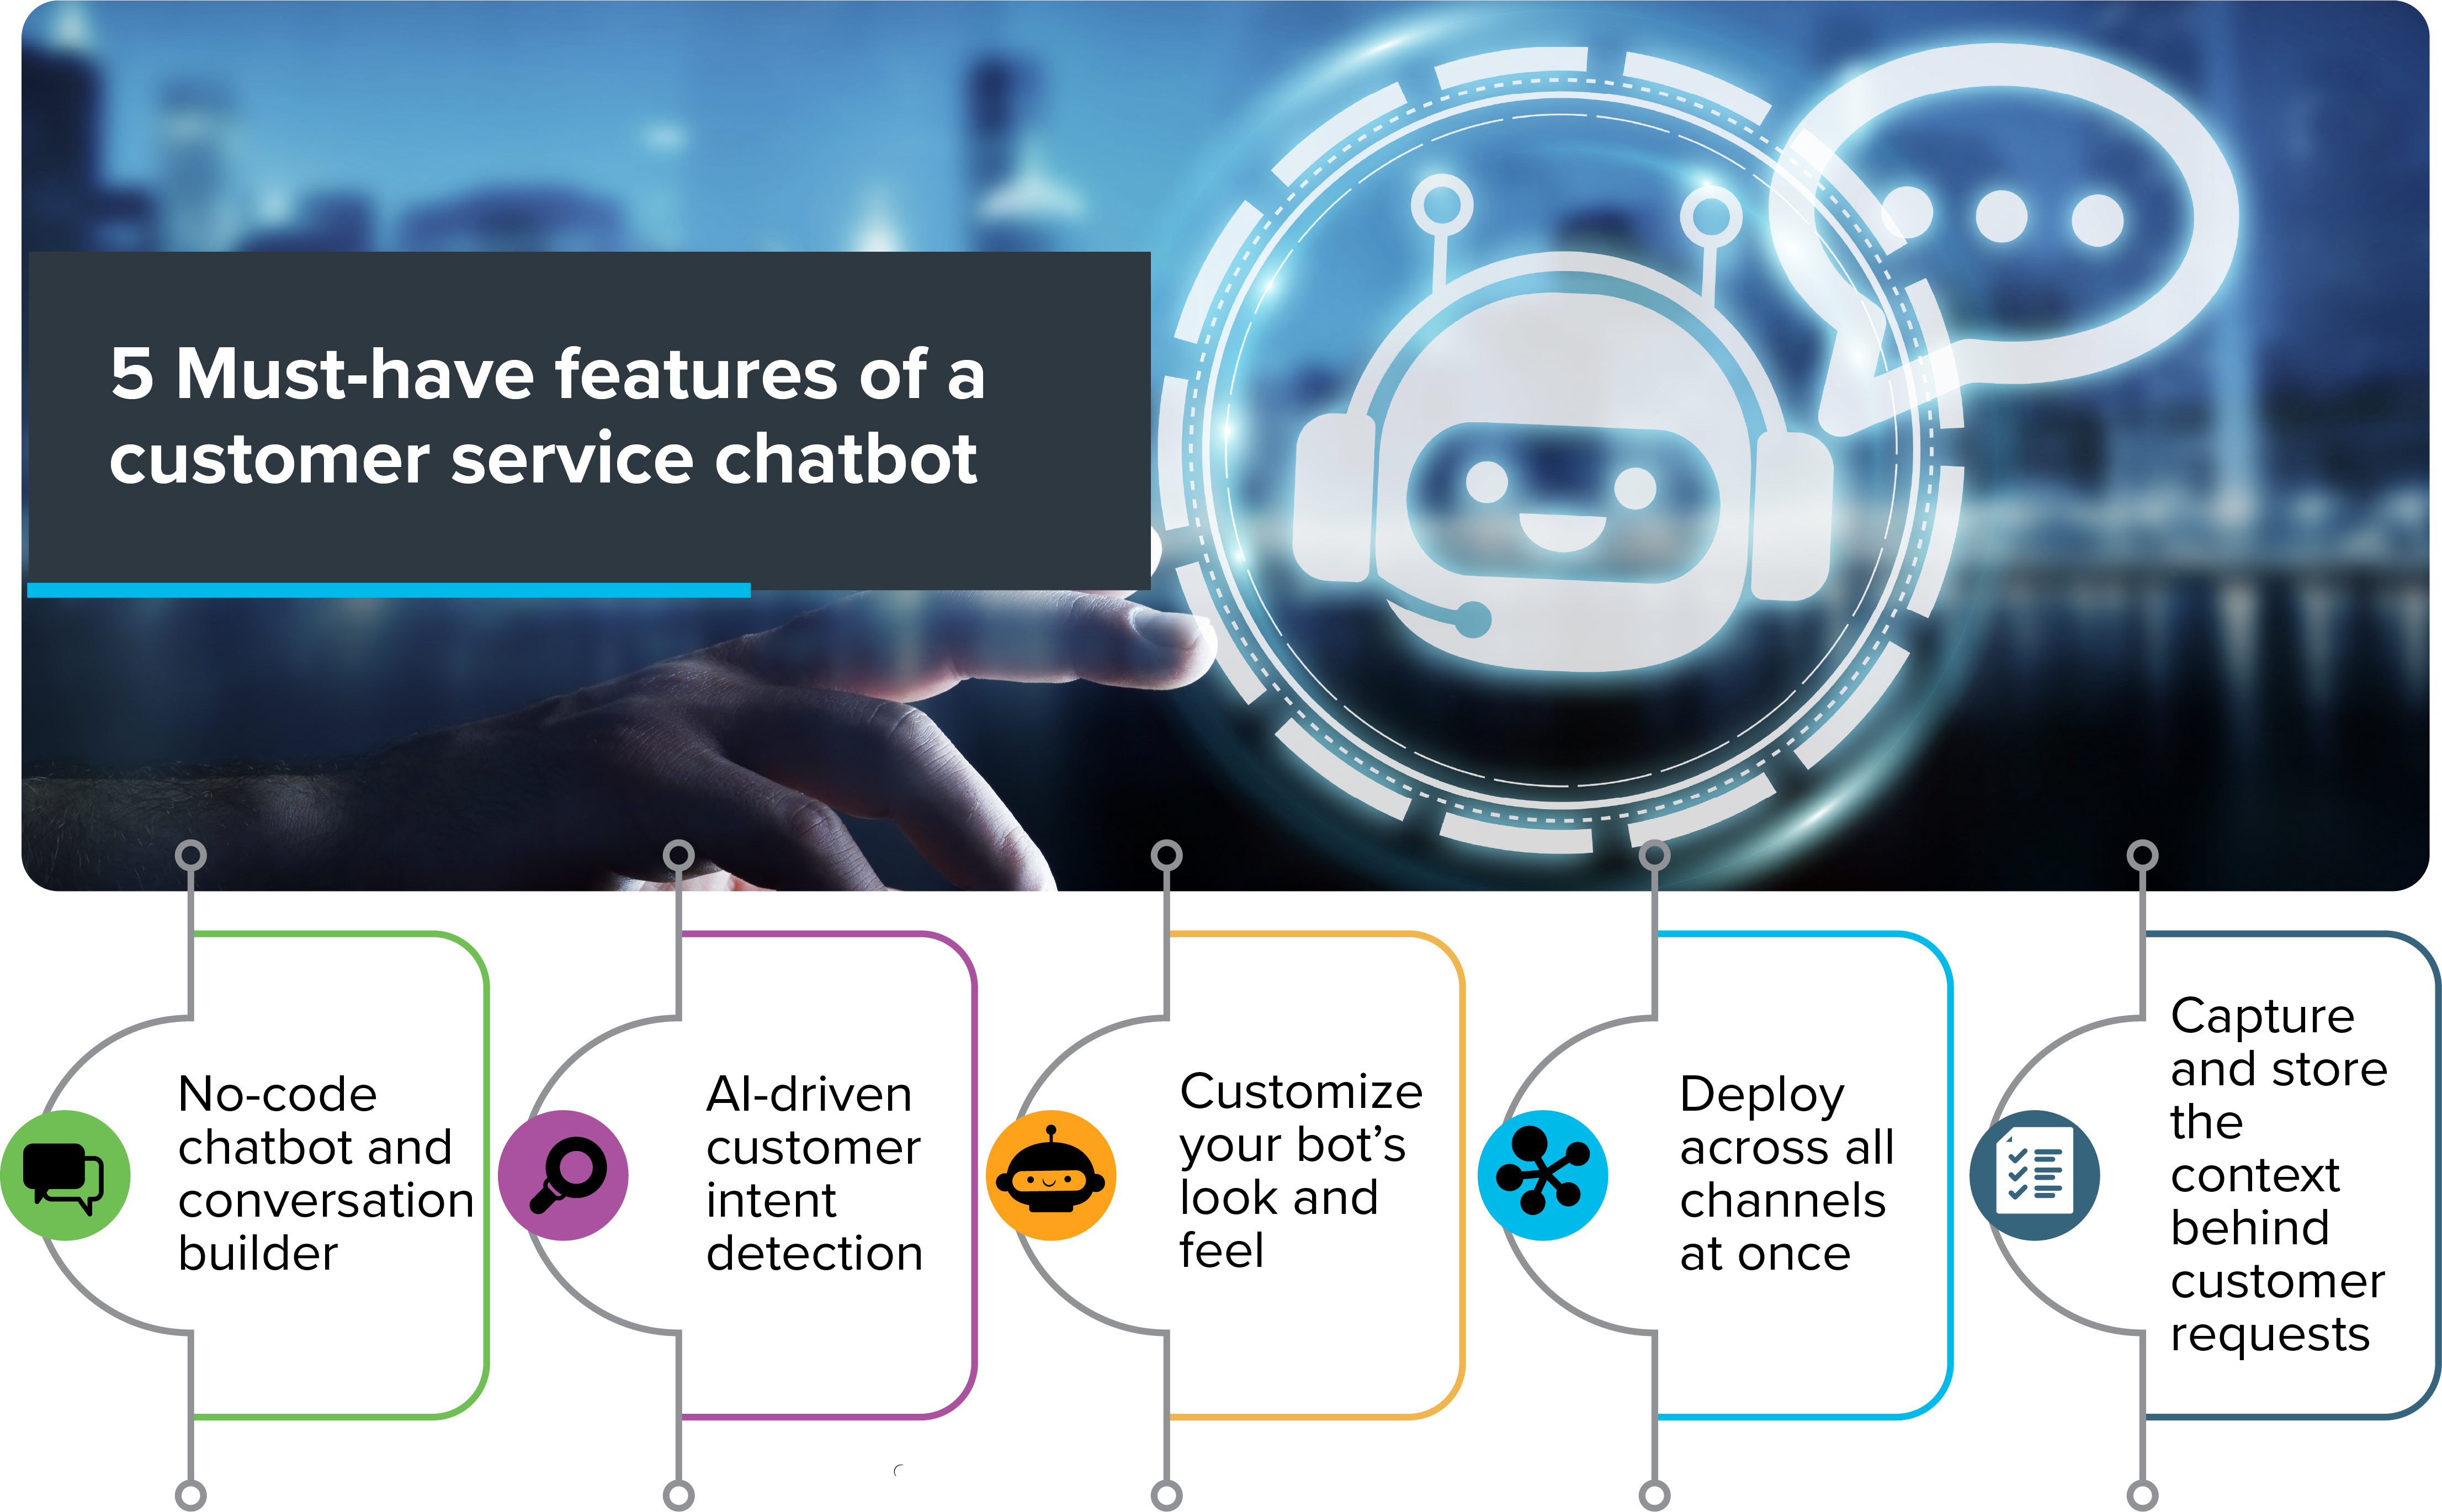 This image shows the 5 features to look out for in a chatbot for customer service.